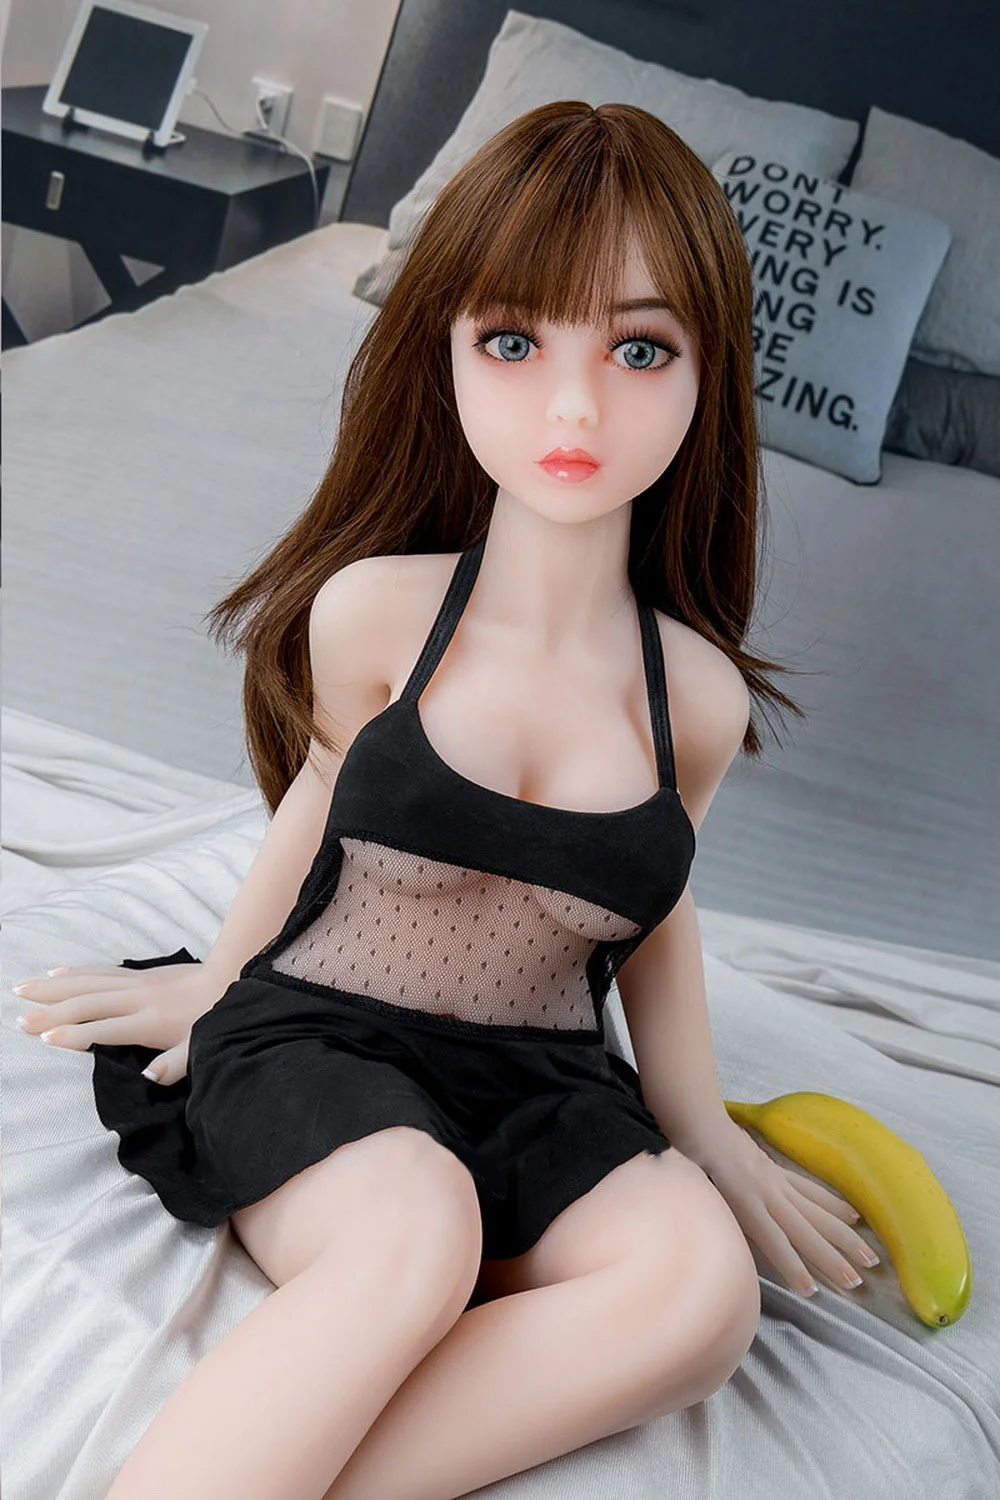 Mini sex doll with banana next to it